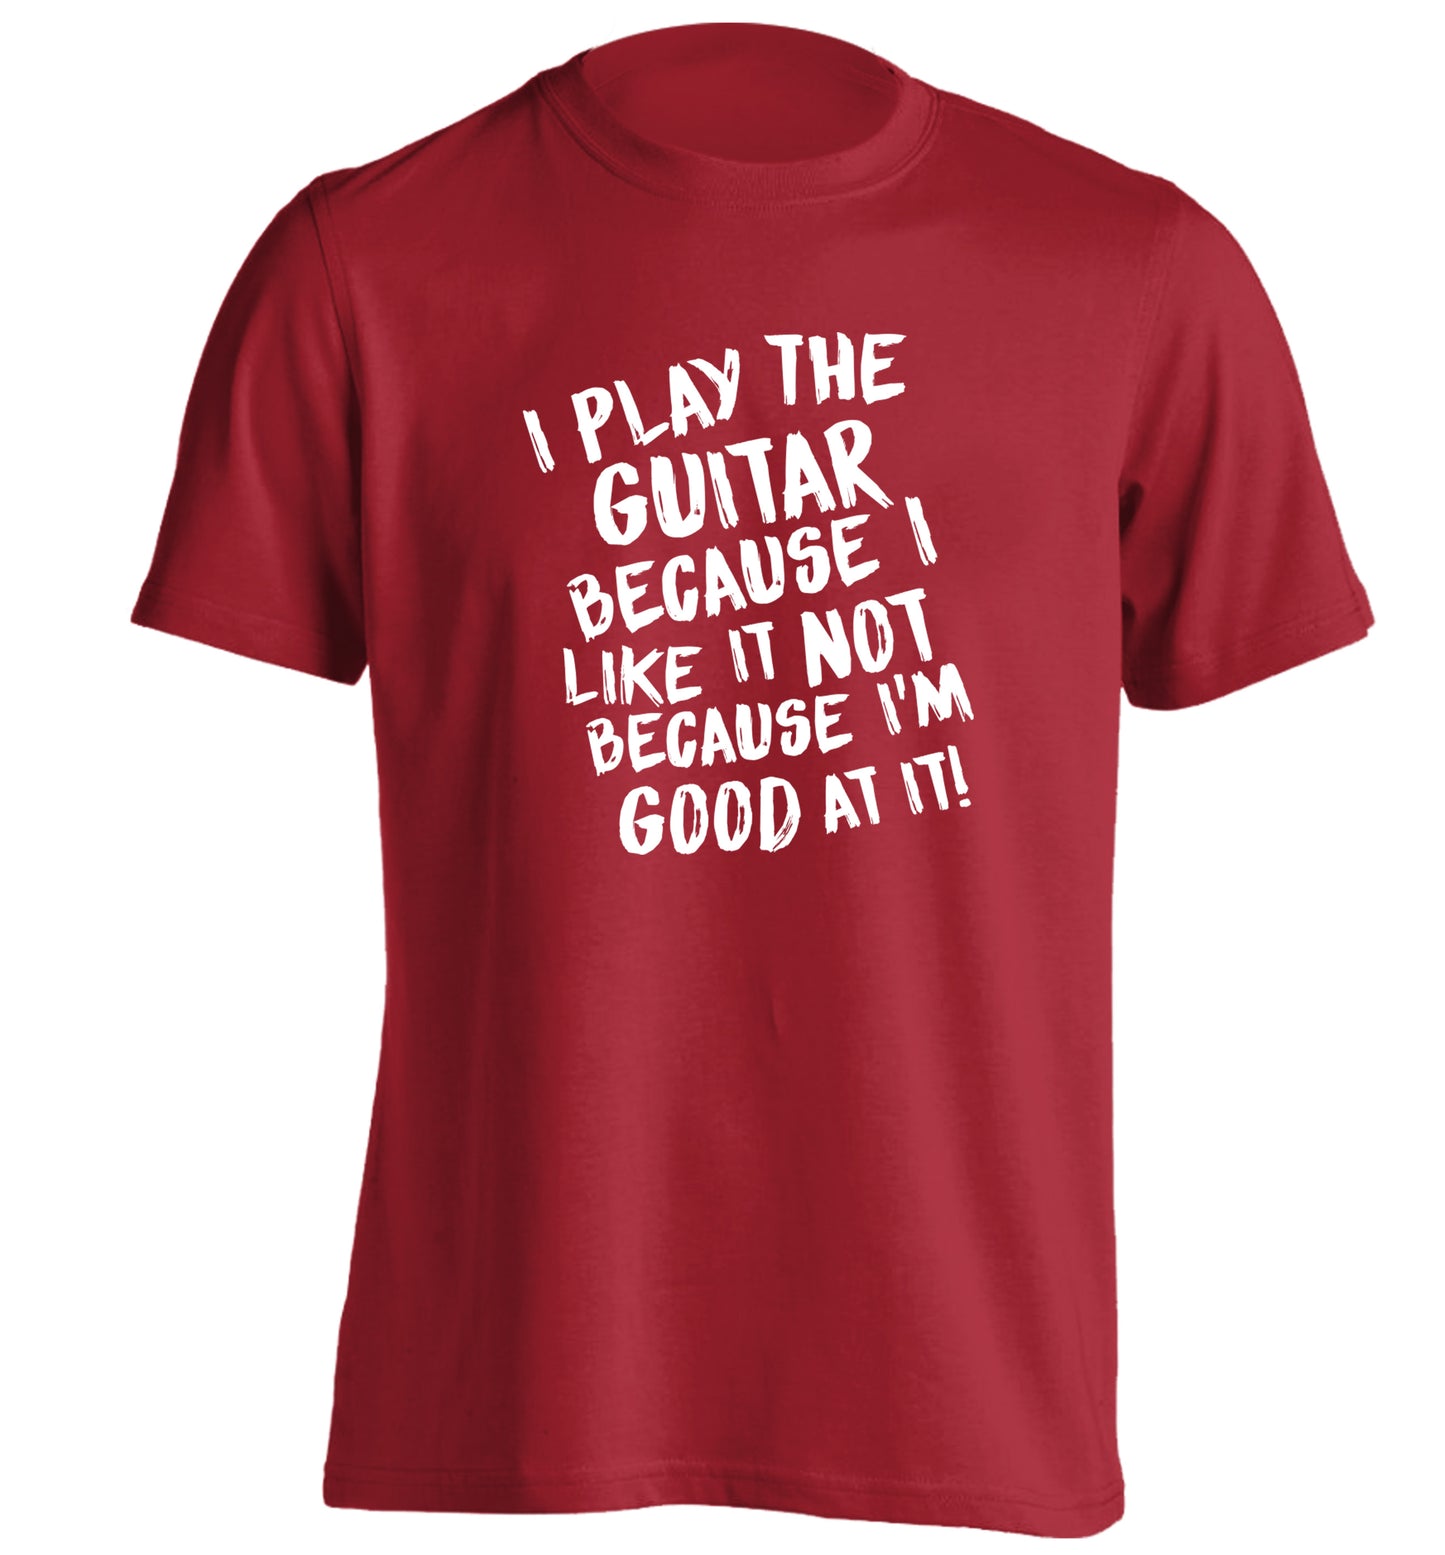 I play the guitar because I like it not because I'm good at it adults unisex red Tshirt 2XL